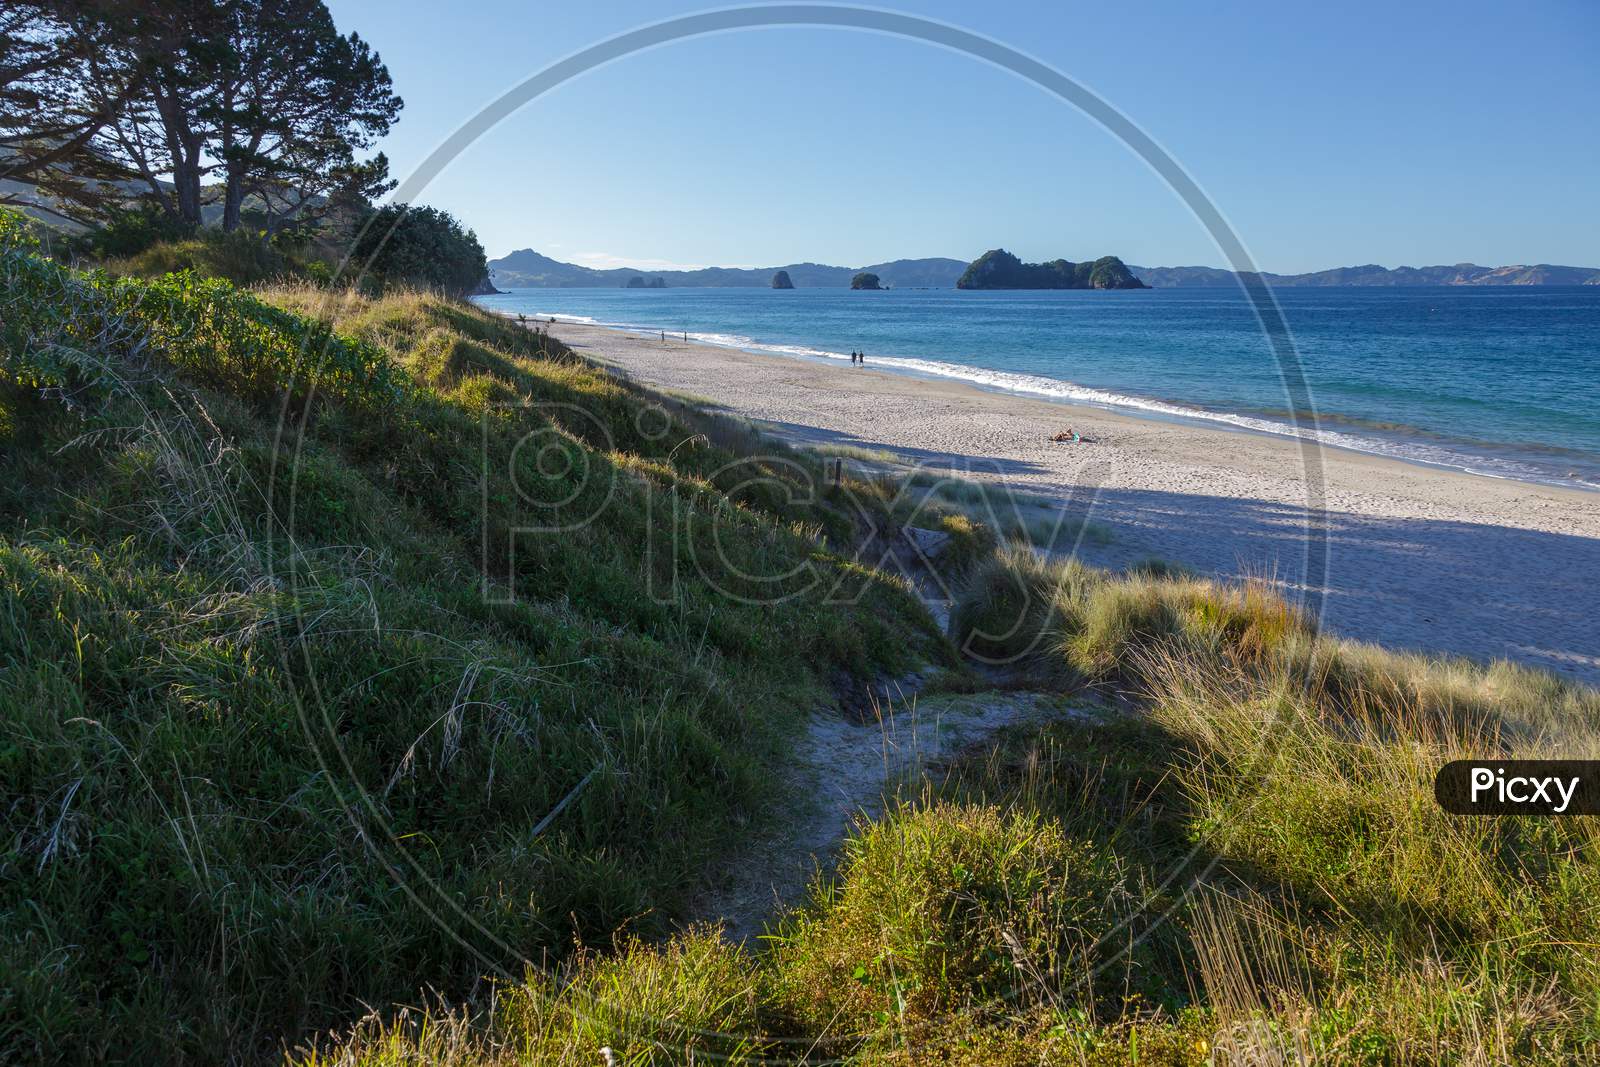 Hahei, New Zealand - February 8 : A Summer Evening At Hahei Beach In New Zealand On February 8, 2012. Unidentified People